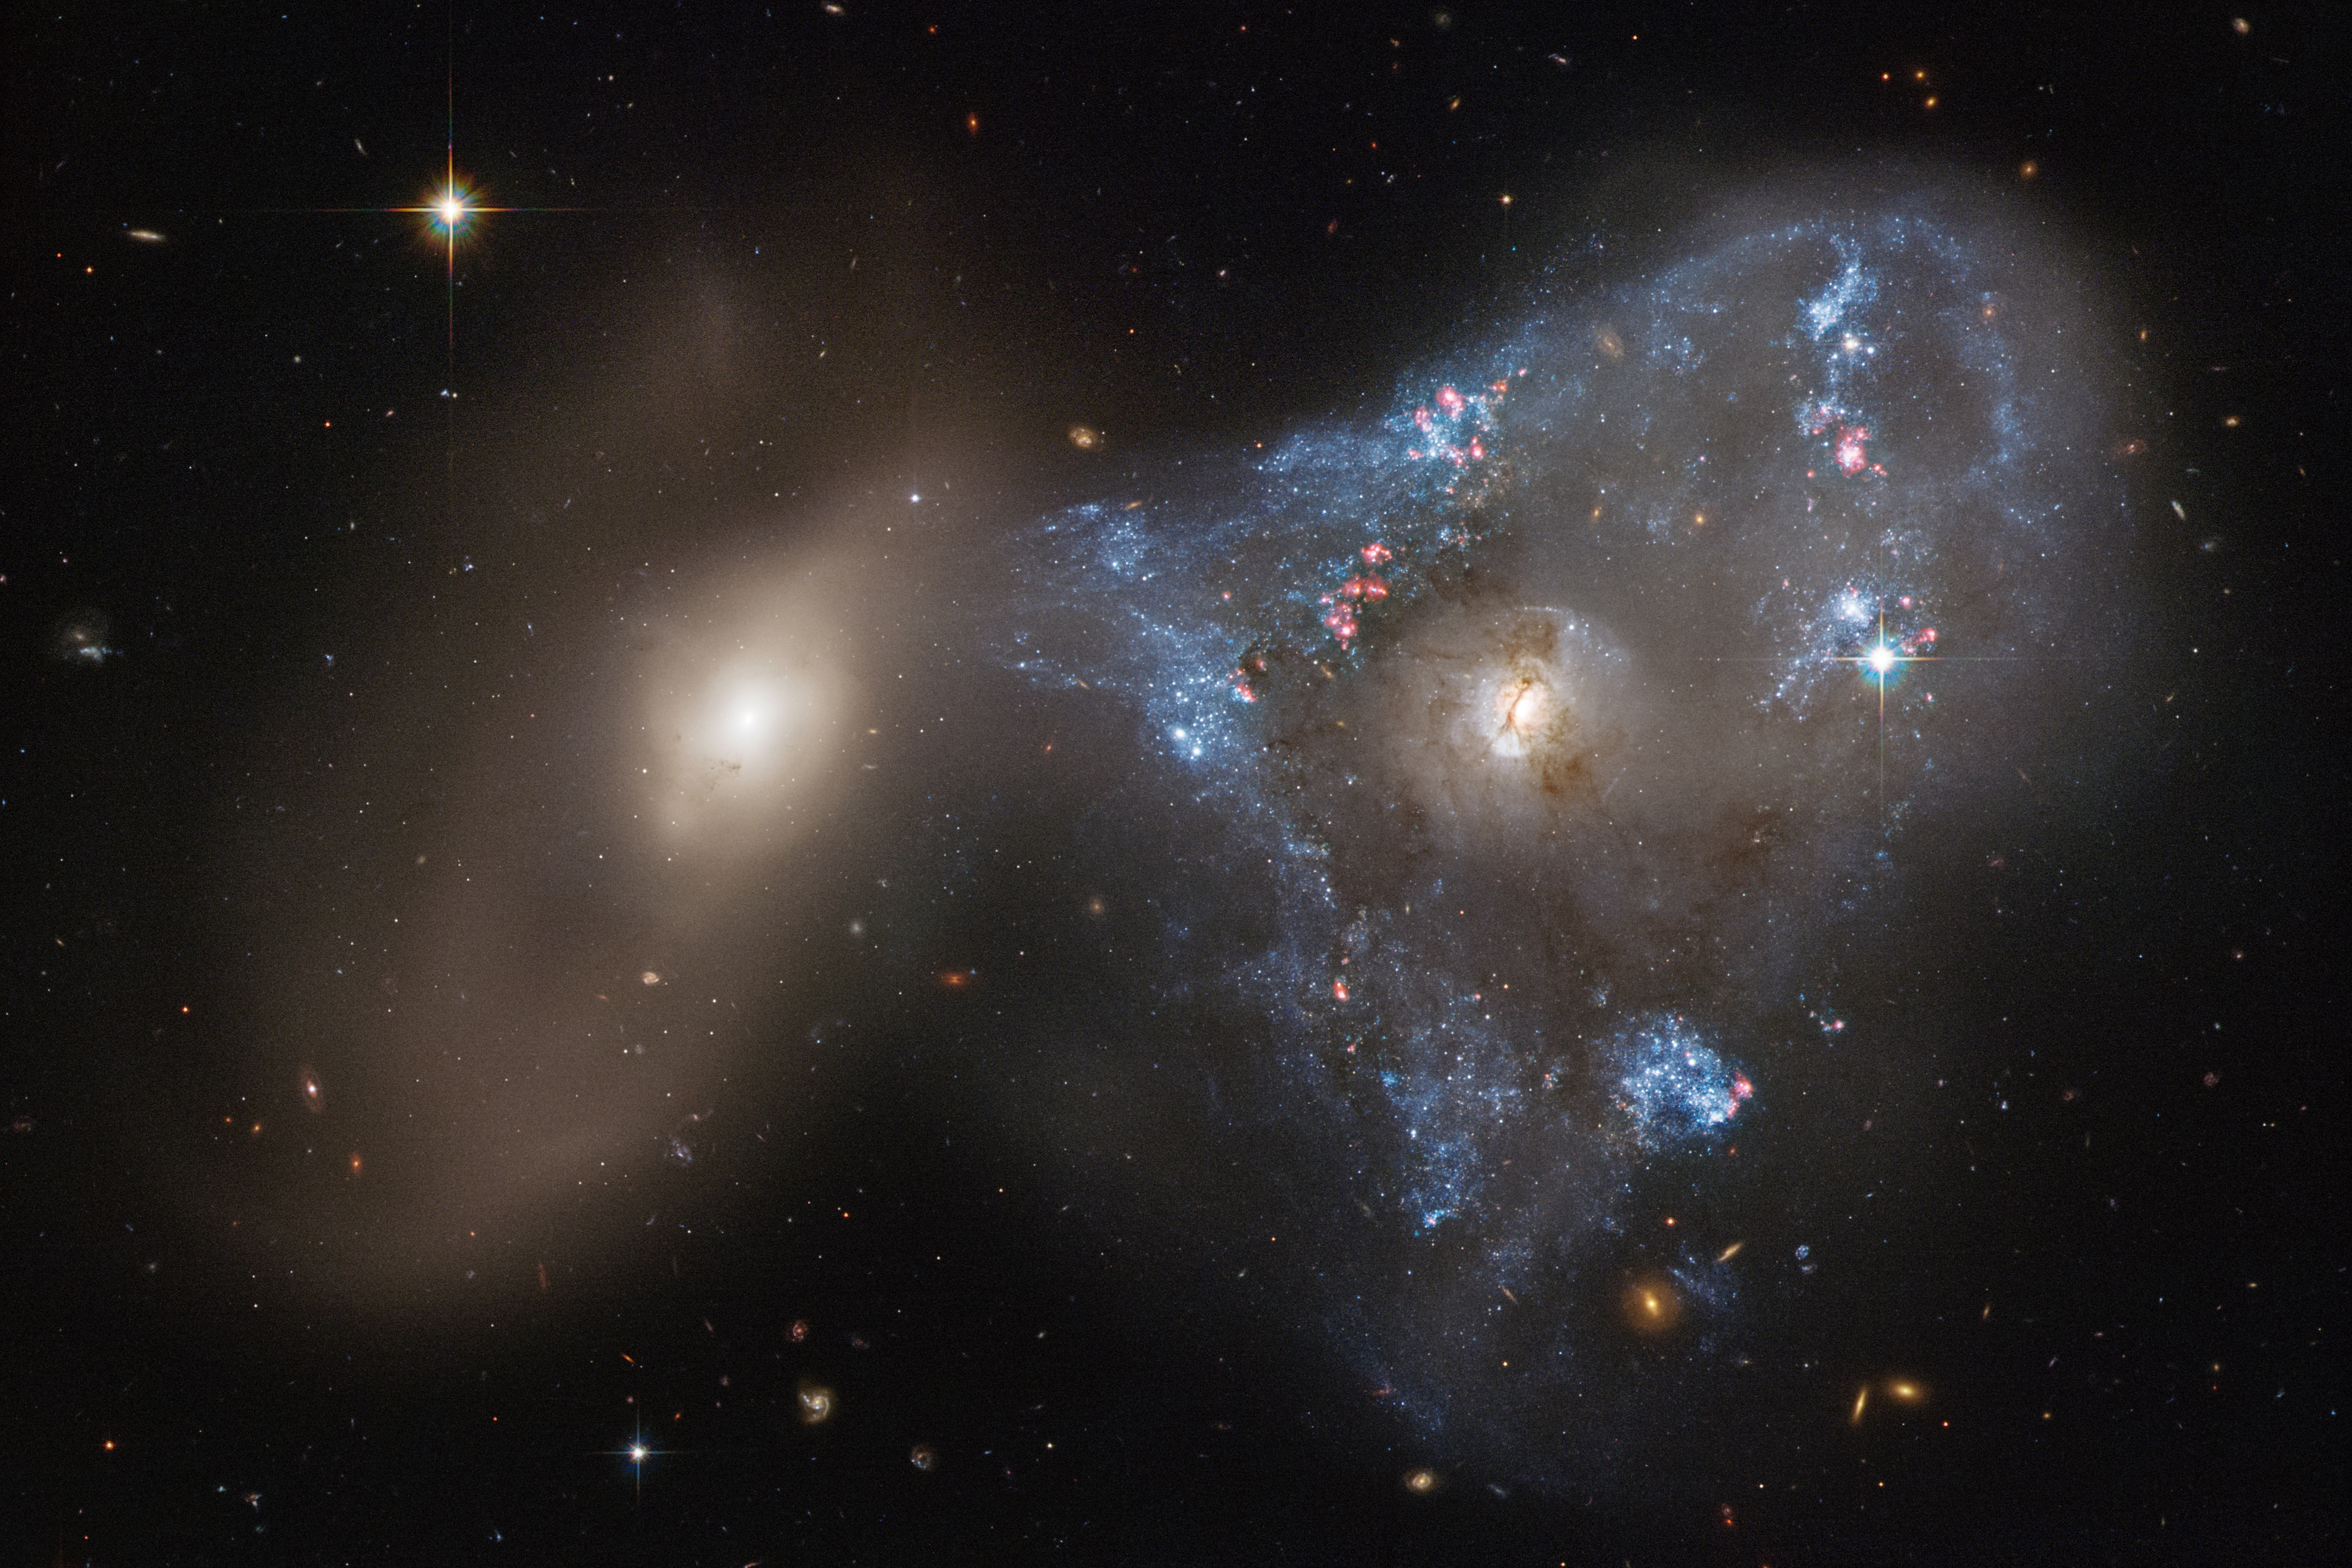 Two galaxies one right one on the left. right galaxy has a blue-white triangular star forming region surrounding it.